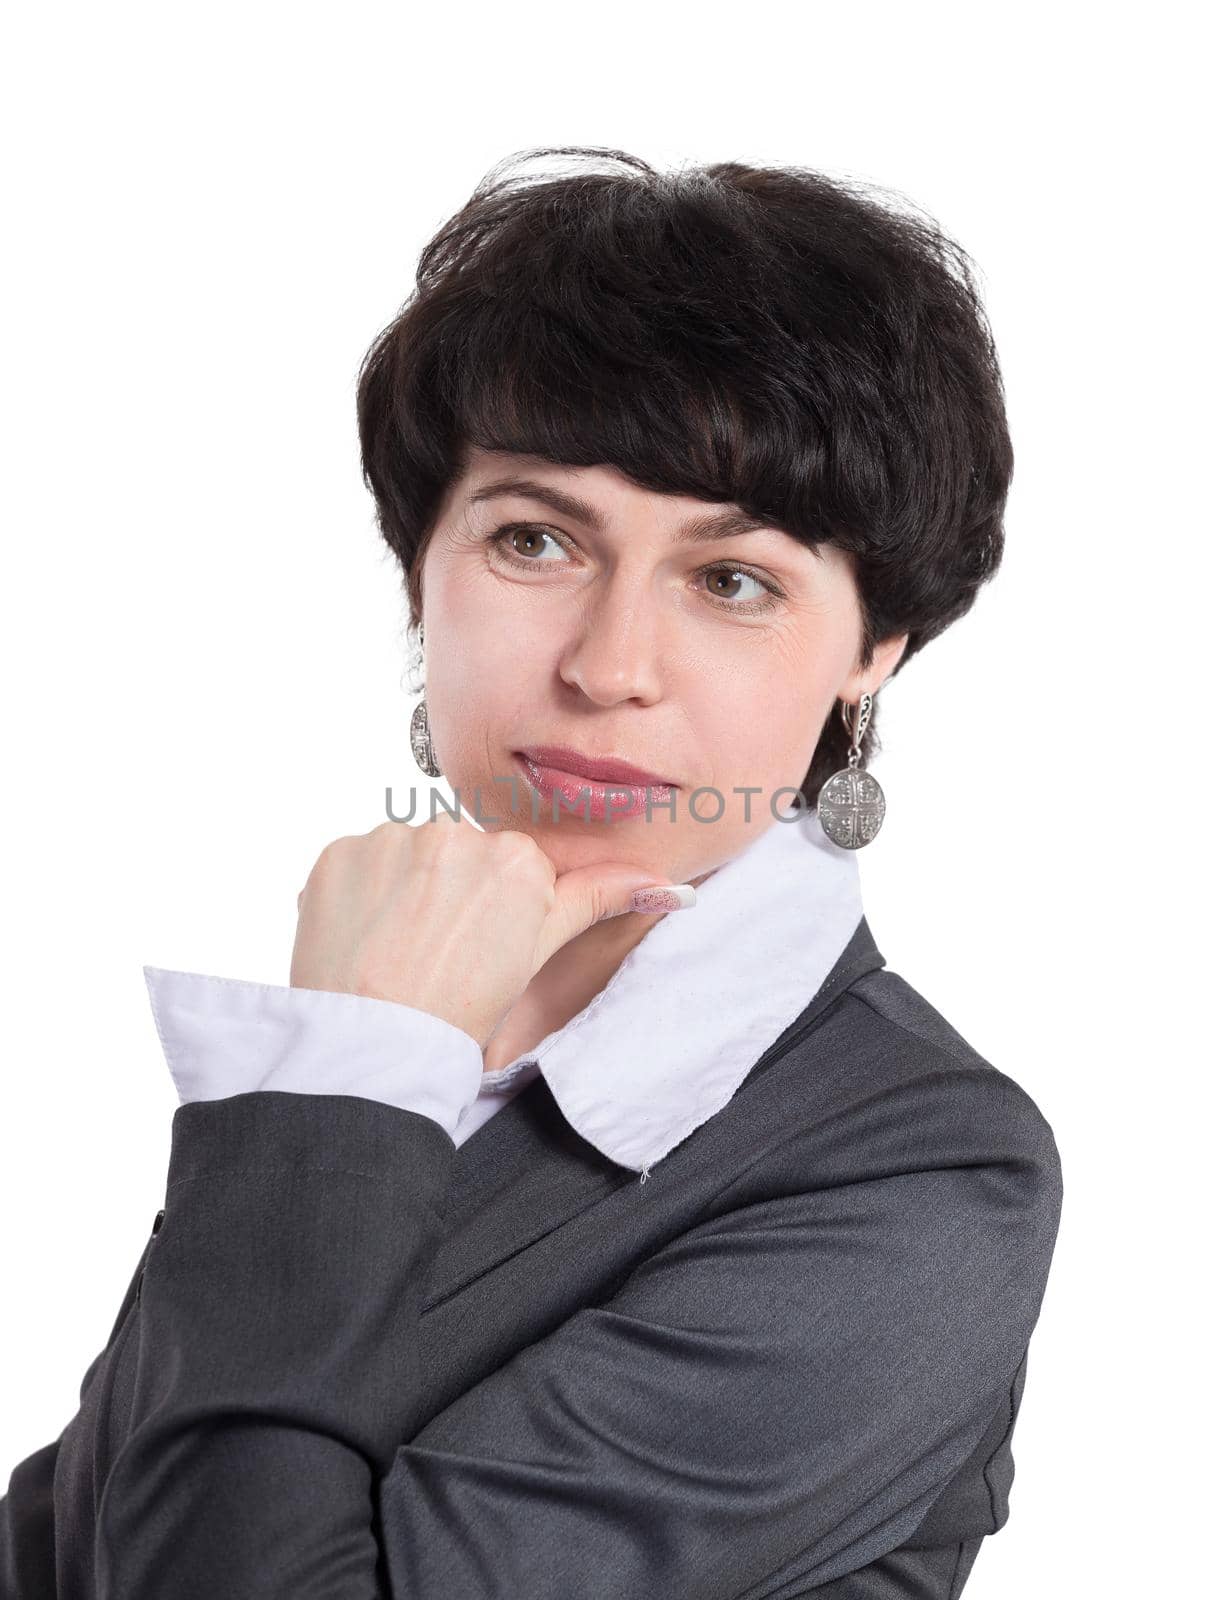 close up. portrait of a young thoughtful business woman. isolated on white background